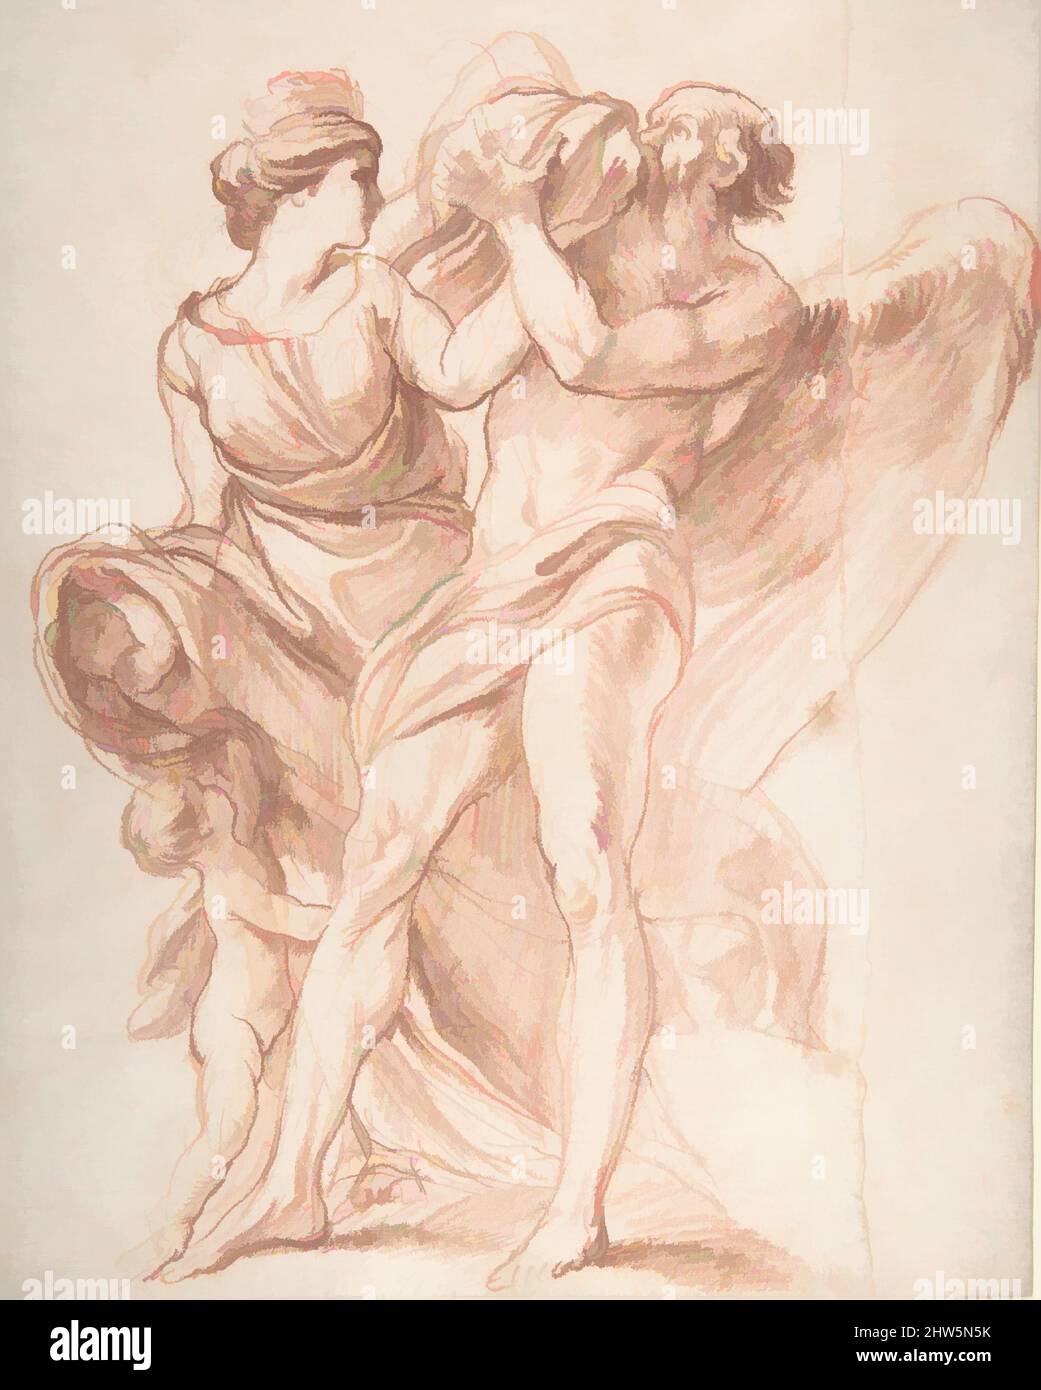 Art inspired by Rhea Outwitting Saturn, 18th century, Red chalk on off-white laid paper, two sheets joined, 13 1/16 x 10 3/8 in. (33.2 x 26.4 cm), Drawings, Edme Bouchardon (French, Chaumont 1698–1762 Paris, Classic works modernized by Artotop with a splash of modernity. Shapes, color and value, eye-catching visual impact on art. Emotions through freedom of artworks in a contemporary way. A timeless message pursuing a wildly creative new direction. Artists turning to the digital medium and creating the Artotop NFT Stock Photo